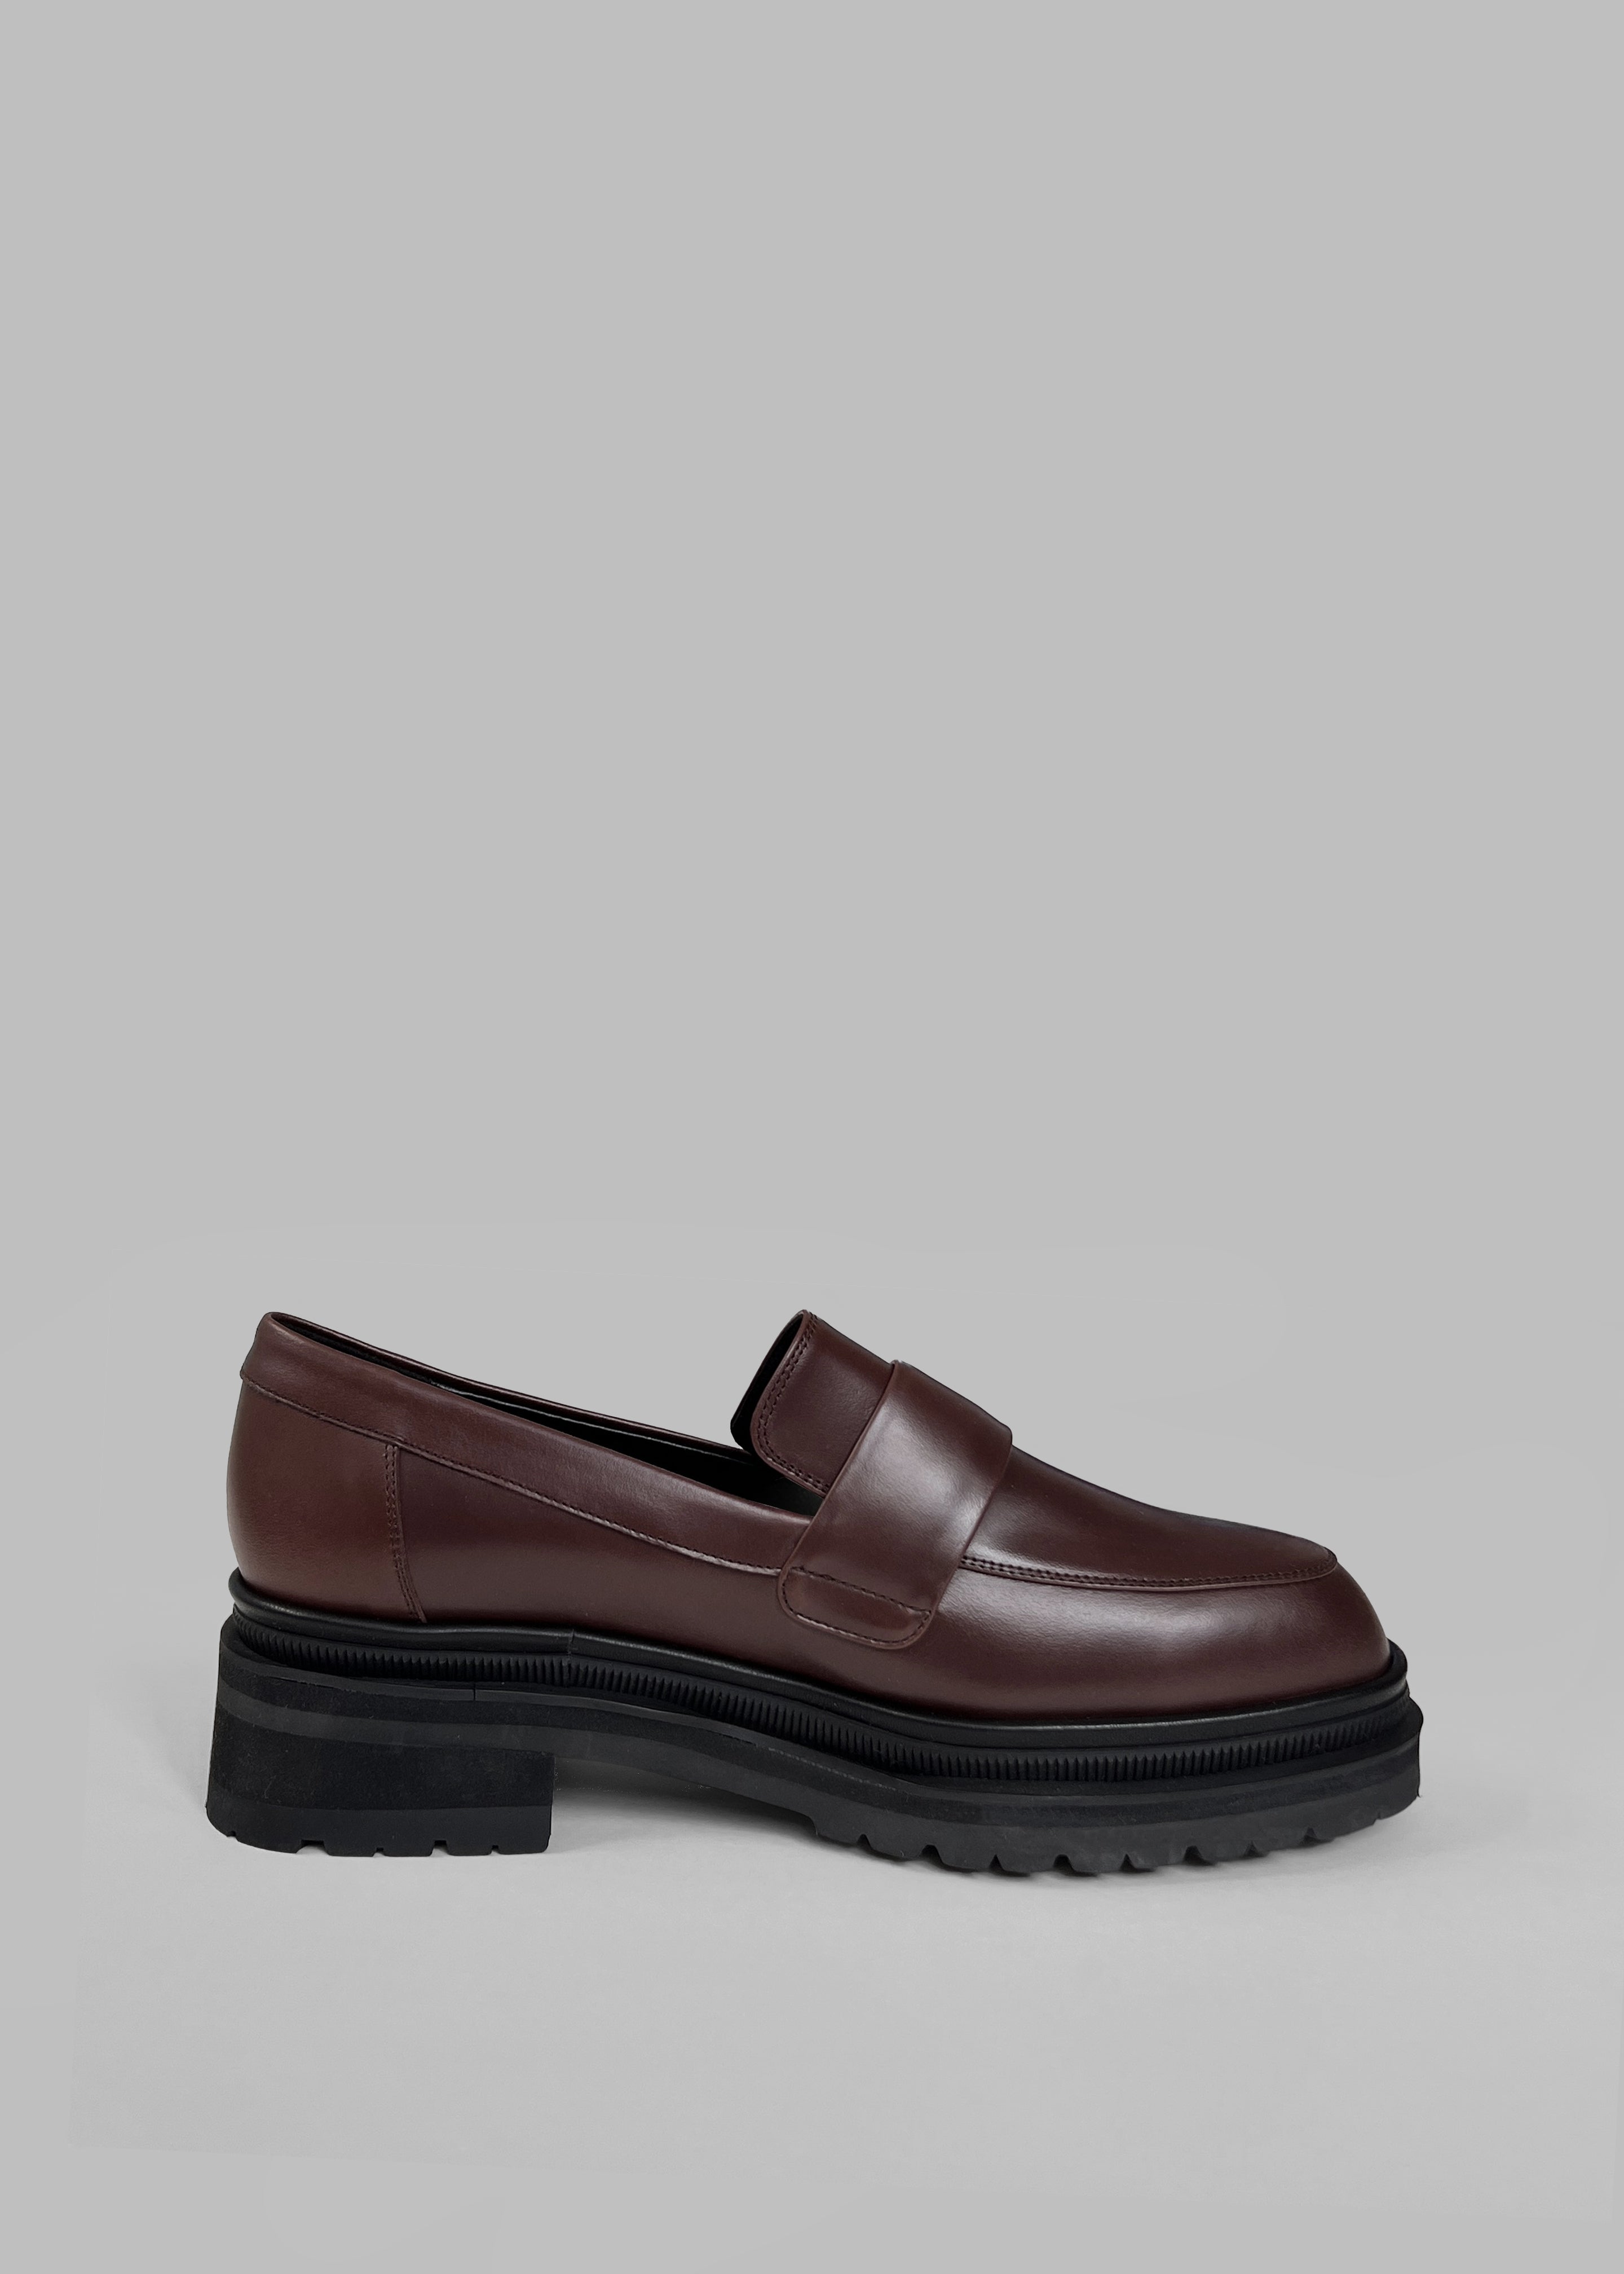 Reese Leather Loafers - Brown - 4